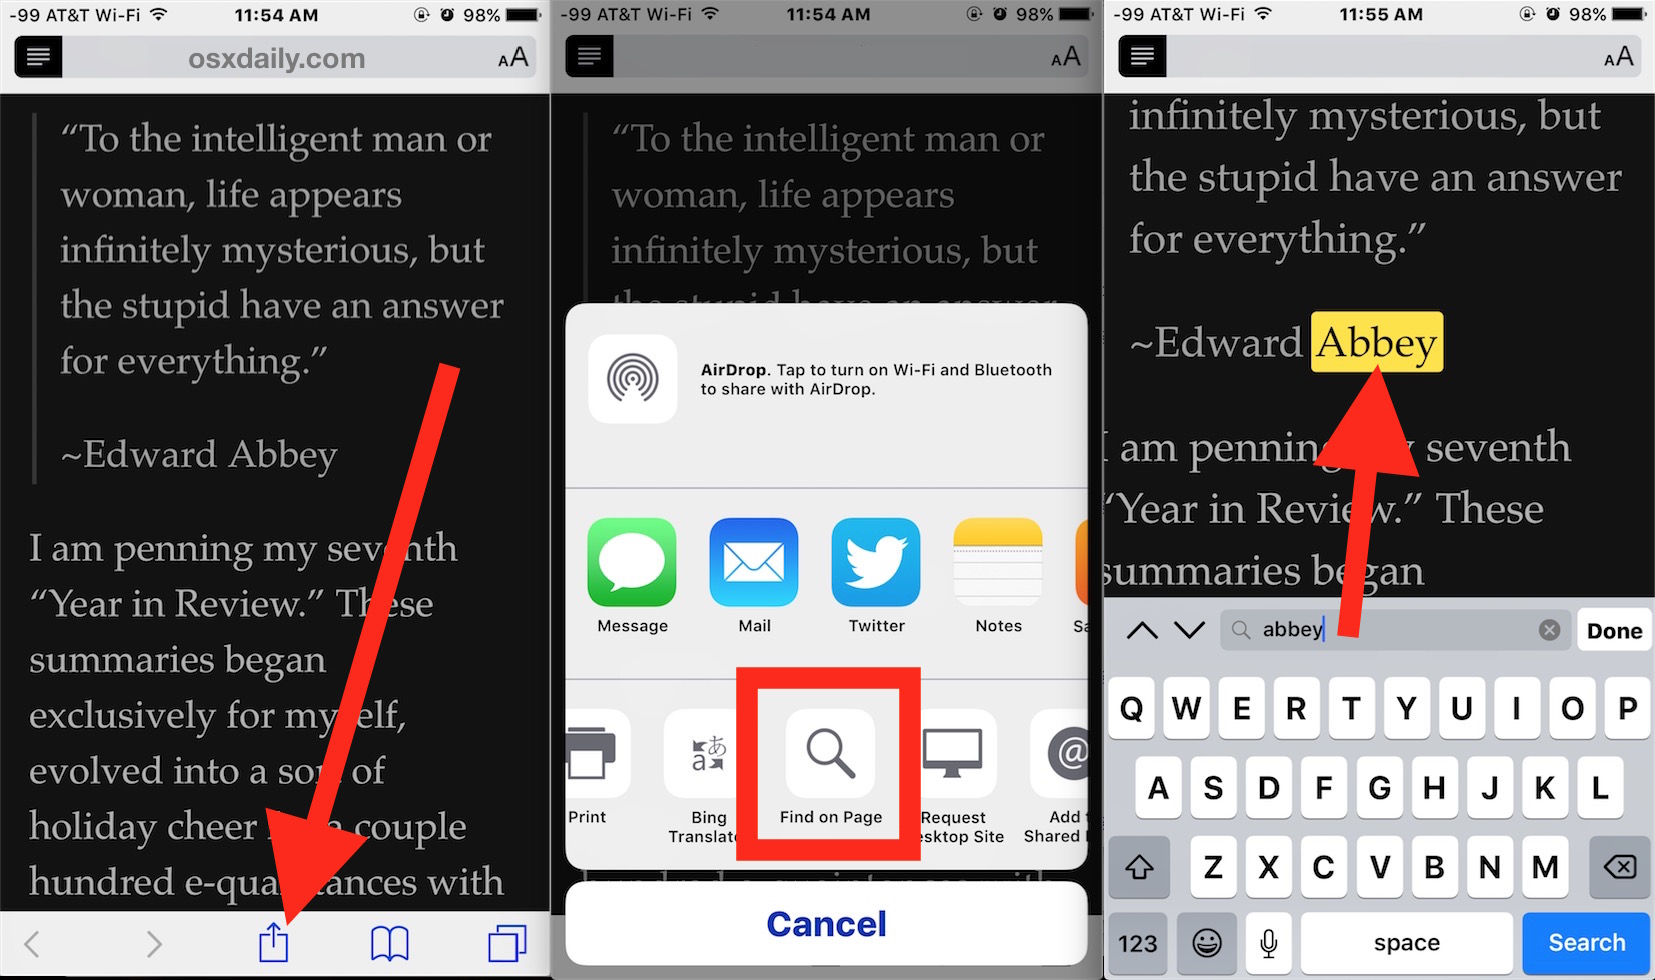 How To Find Text On Web Page In Safari On Iphone Ipad With Ios 12 Ios 11 10 9 Osxdaily